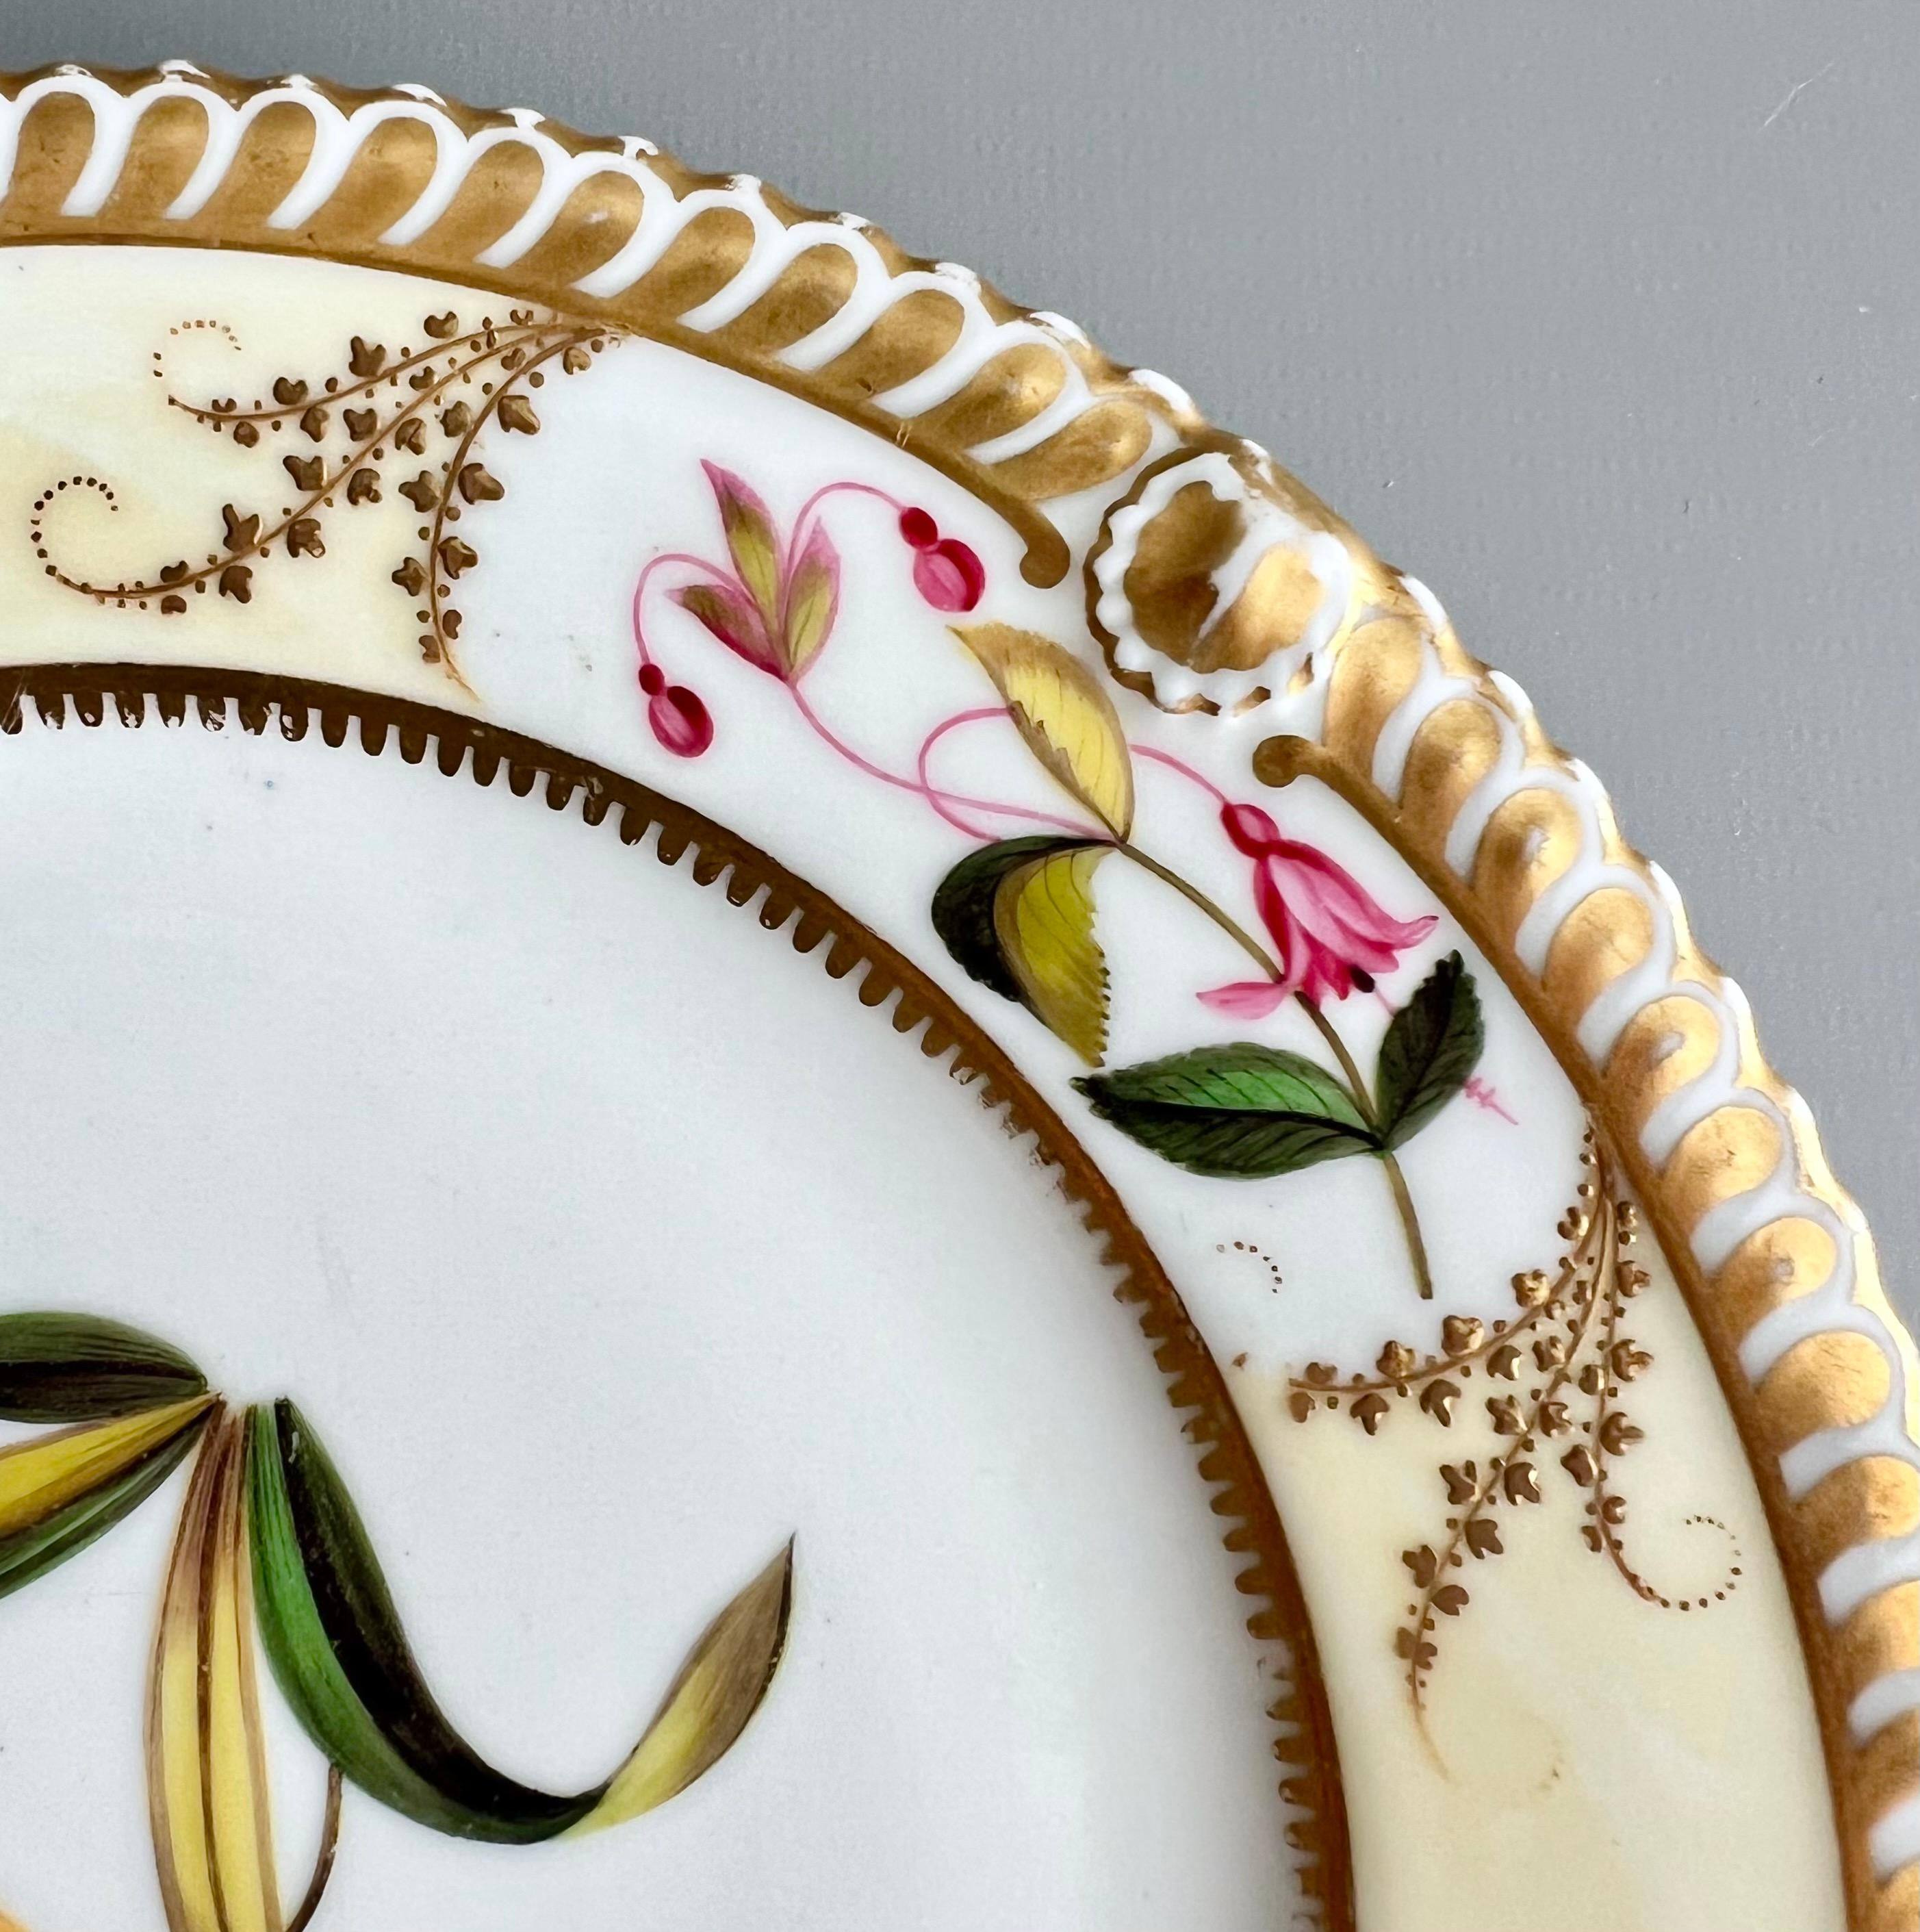 Porcelain Chamberlains Worcester Plate, Yellow with Tulip and Flower Reserves, 1815-1820